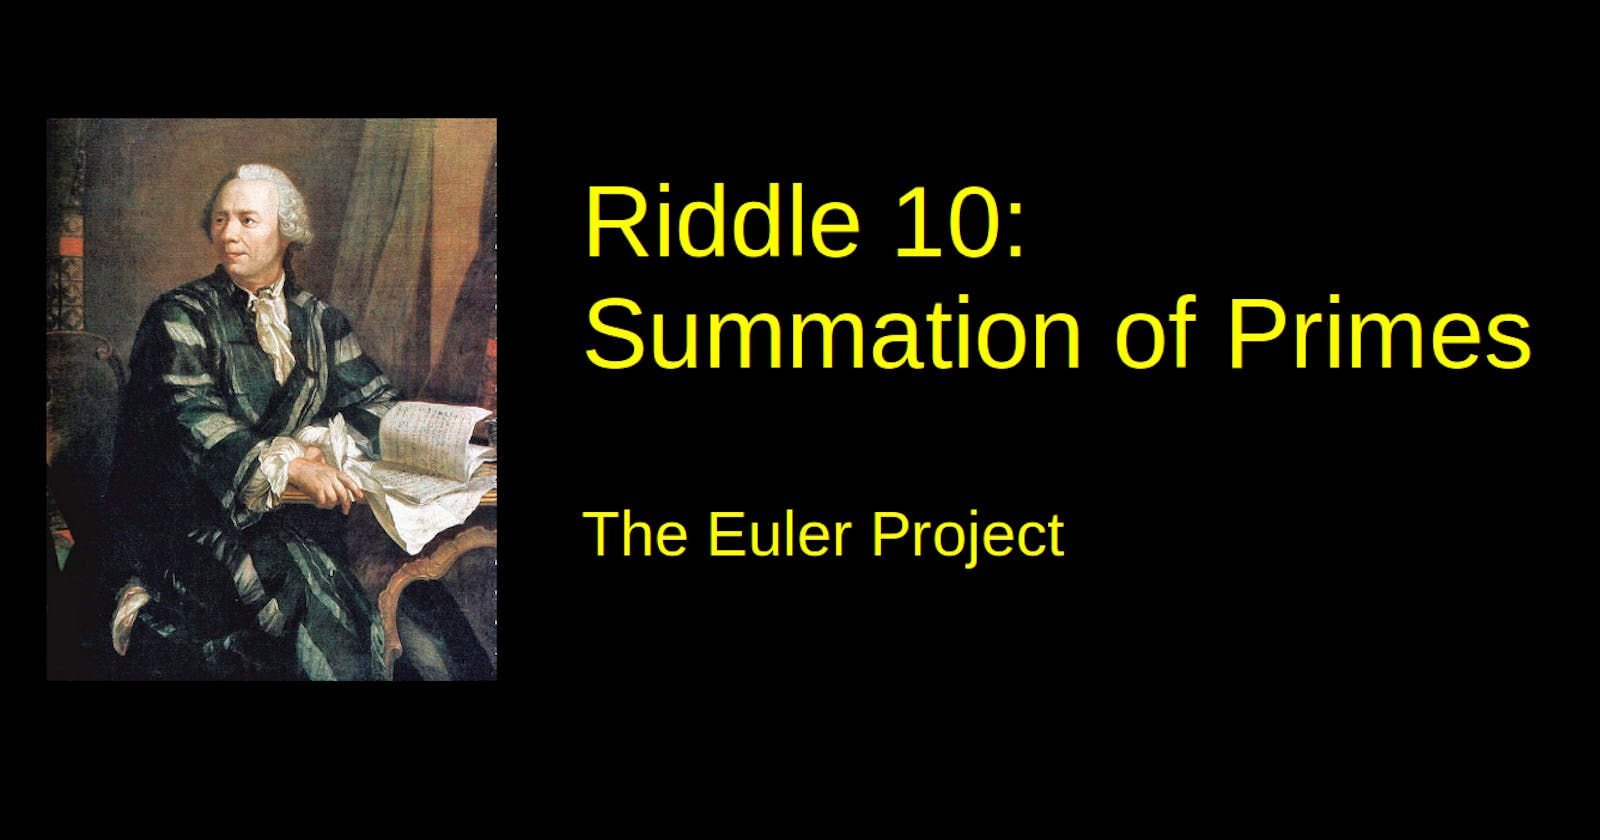 Riddle 10: Summation of primes